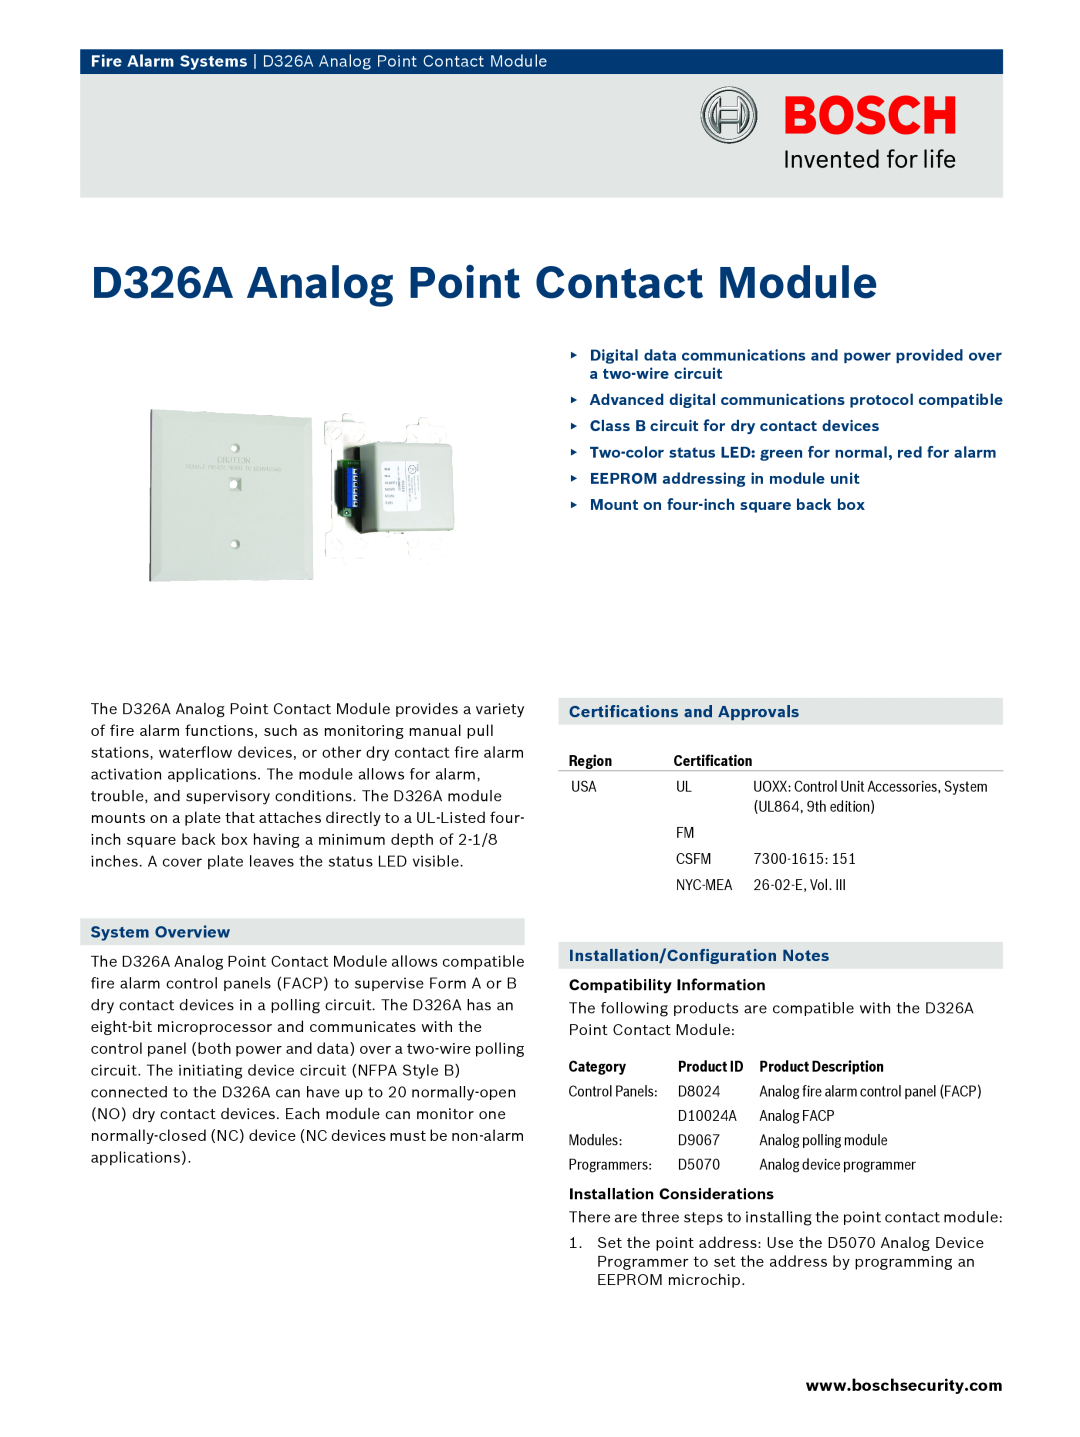 Bosch Appliances manual Fire Alarm Systems D326A Analog Point Contact Module, Certifications and Approvals, Region 